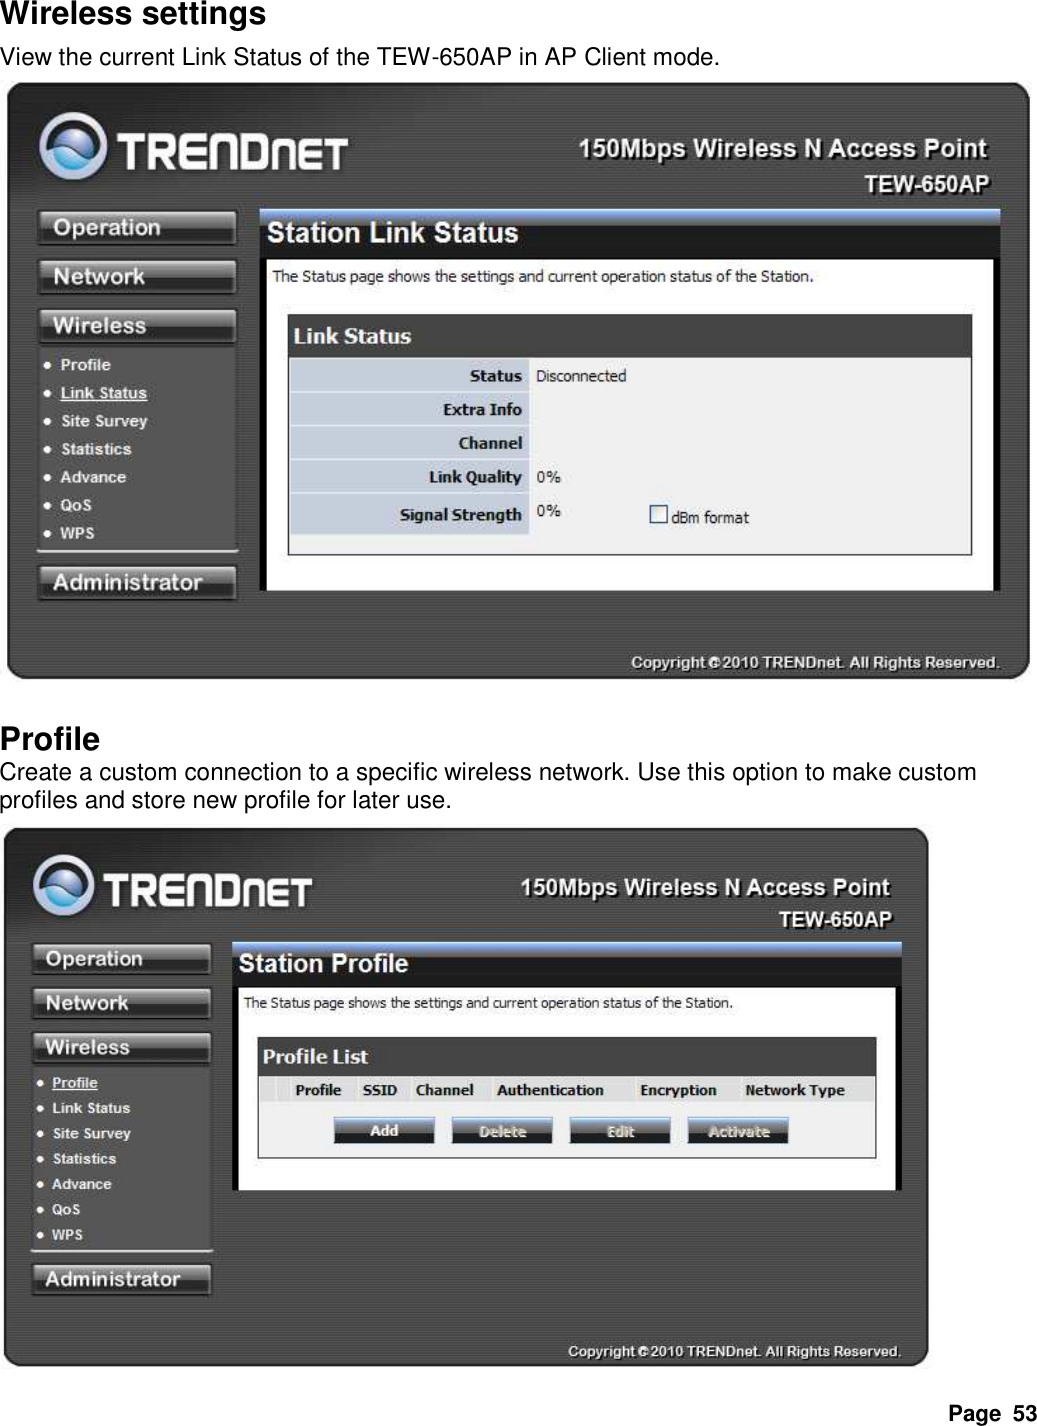 Page  53 Wireless settings View the current Link Status of the TEW-650AP in AP Client mode.    Profile Create a custom connection to a specific wireless network. Use this option to make custom profiles and store new profile for later use.    